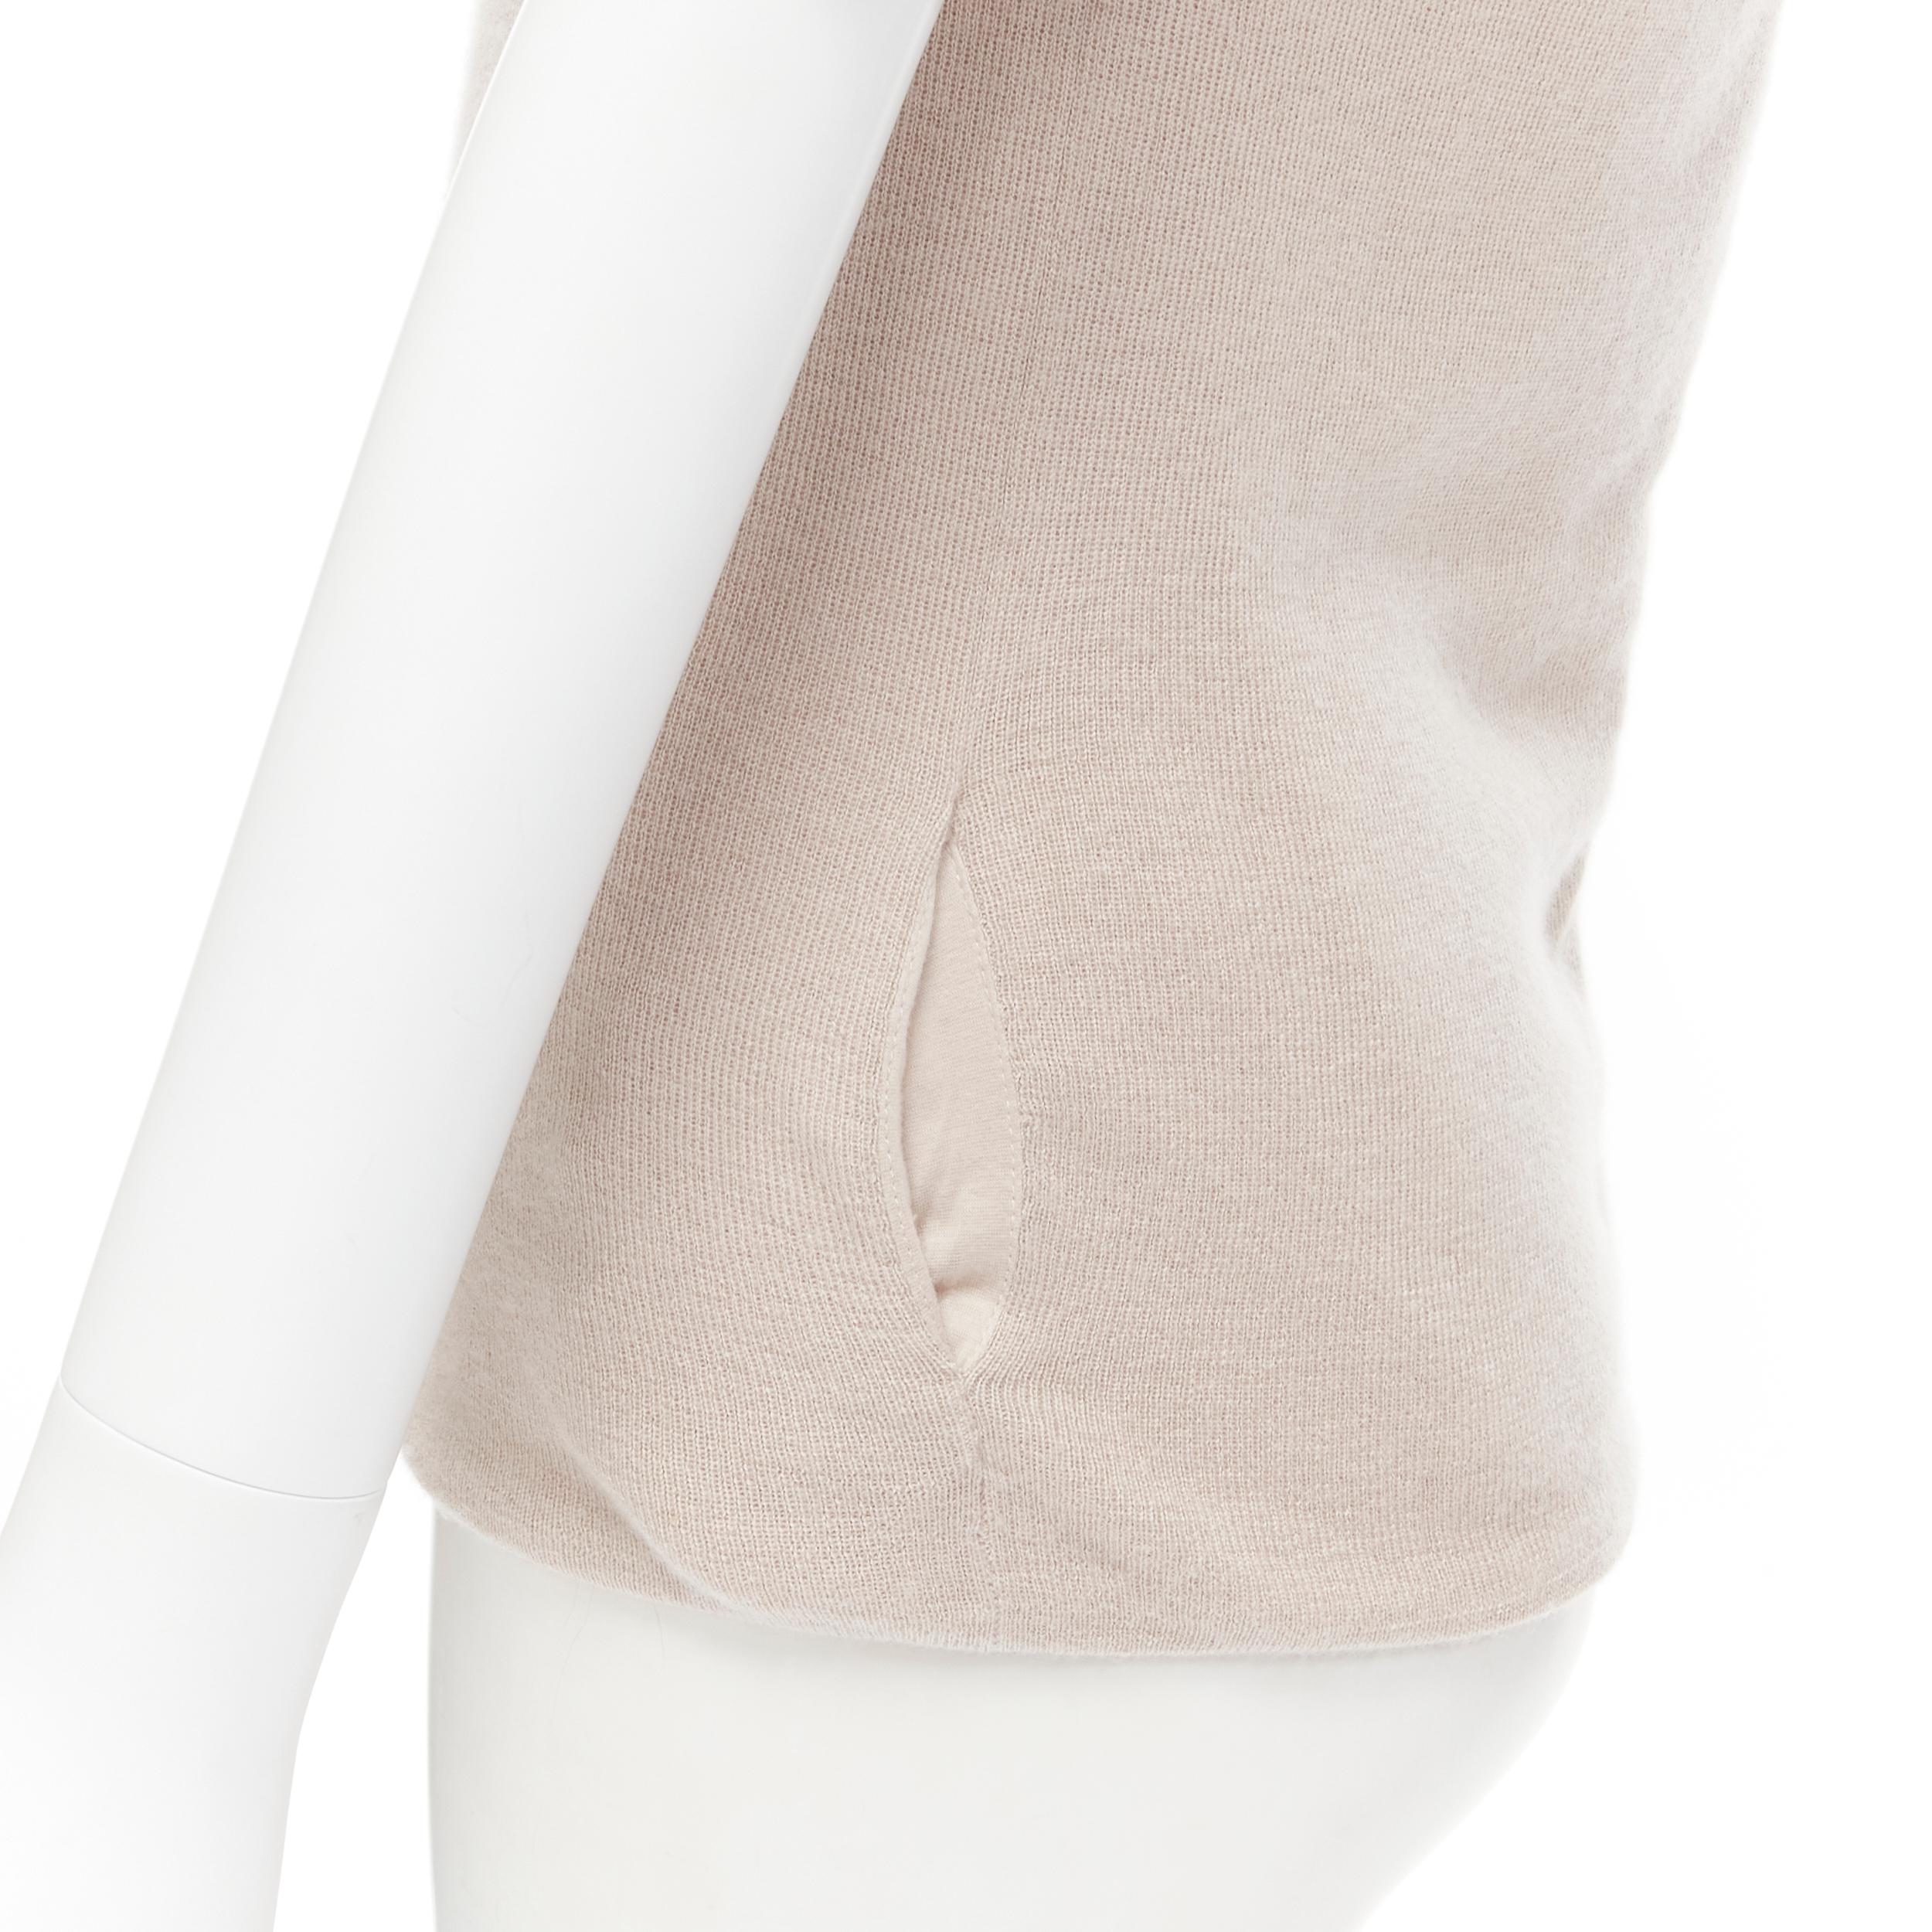 CHLOE Perle beige cashmere silk gold zip back short sleeve sweater S 
Reference: MELK/A00048 
Brand: Chloe 
Material: Cashmere 
Color: Beige 
Pattern: Solid 
Closure: Zip 
Extra Detail: Dual side seam pockets. Gold-tone zip back closure. 
Made in: